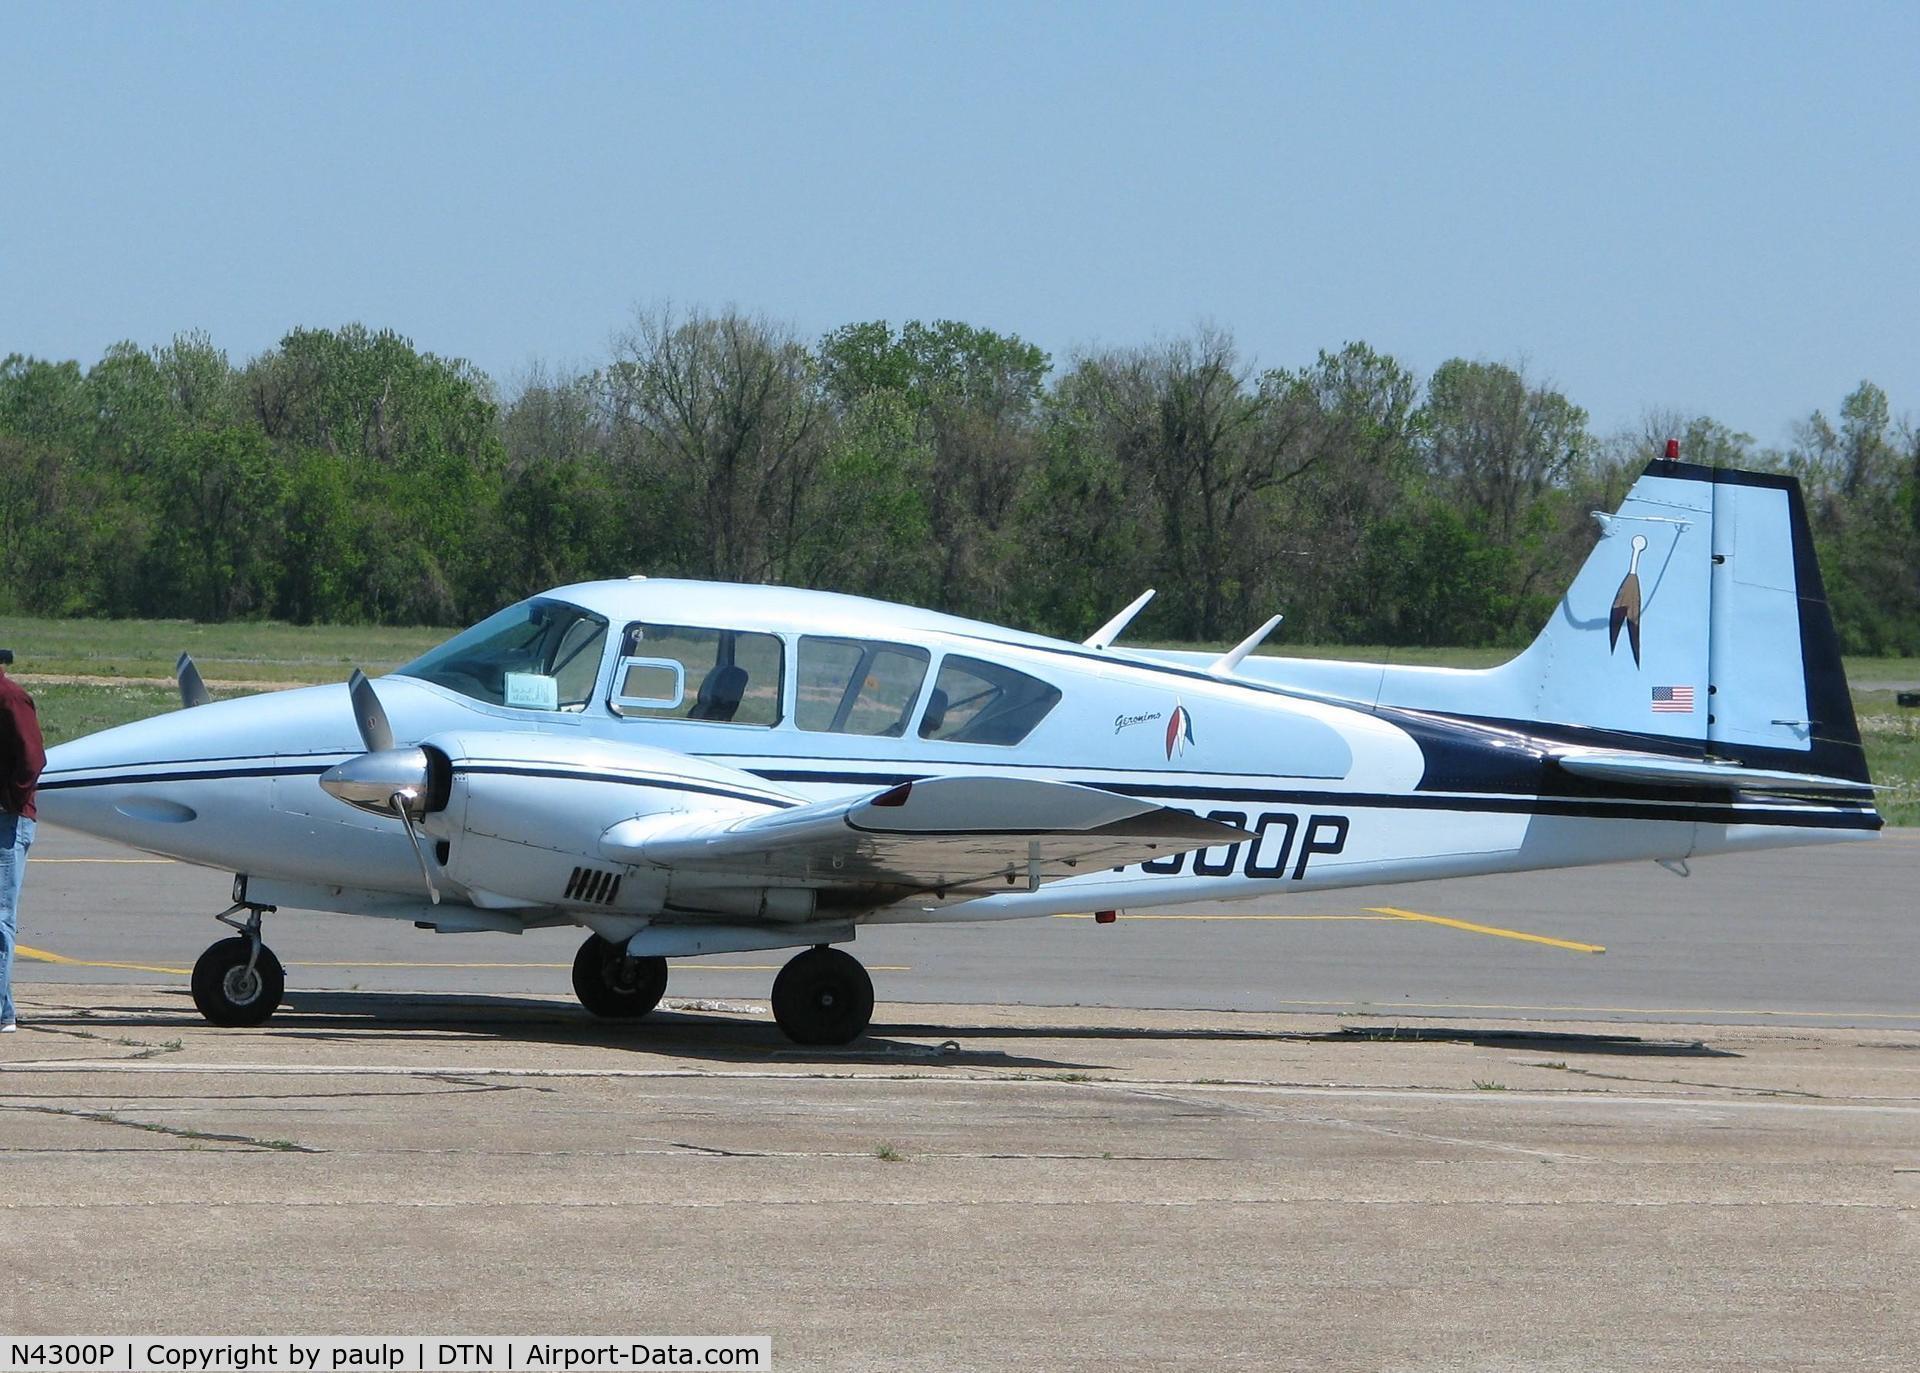 N4300P, 1959 Piper PA-23-160 Apache C/N 23-1801, Parked at Downtown Shreveport.